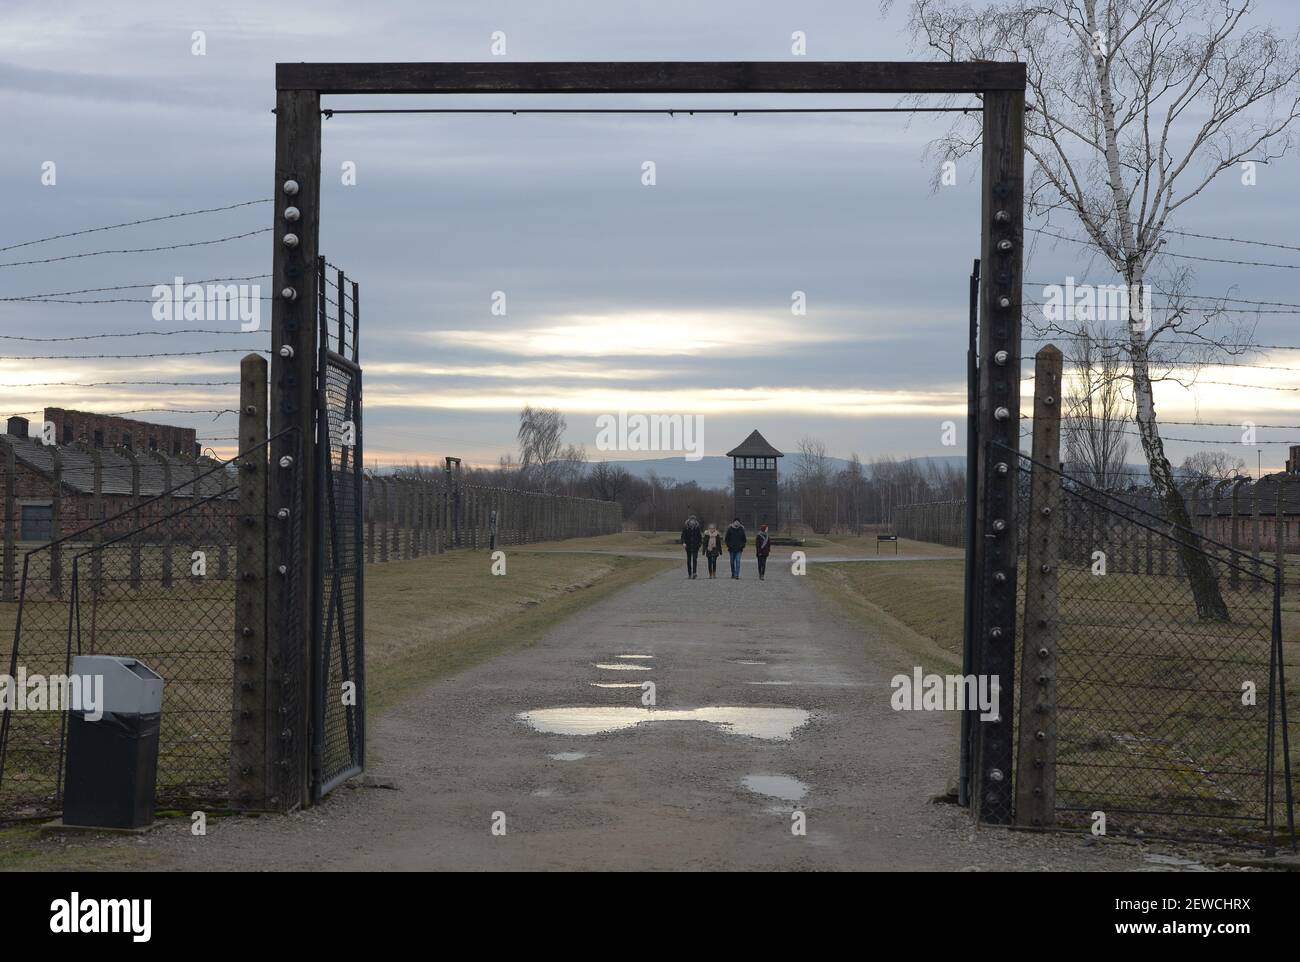 An image from Auschwitz-Birkenau on the day of 71st Anniversary of the Liberation of the former Nazi German Concentration and Extermination Camp in Auschwitz-Birkenau.  Brzezinka (Auschwitz-Birkenau) camp, Oswiecim, Poland. On 27 January 2016. Stock Photo